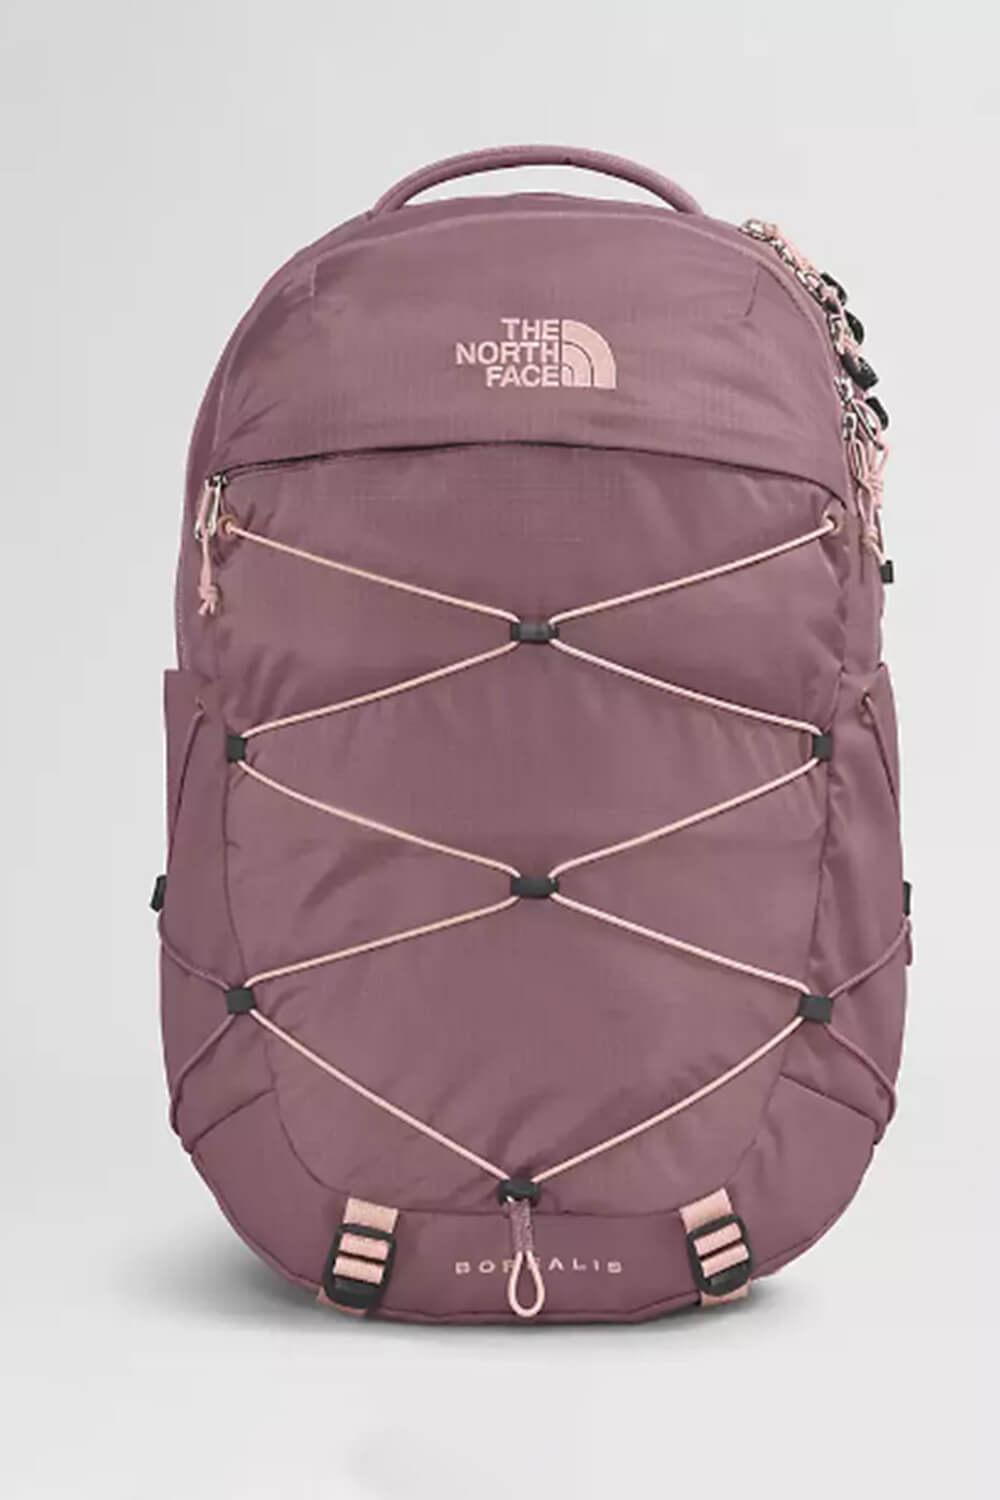 The North Face Borealis Laptop Backpack For Women In Fawn Grey/Pink | –  Glik'S